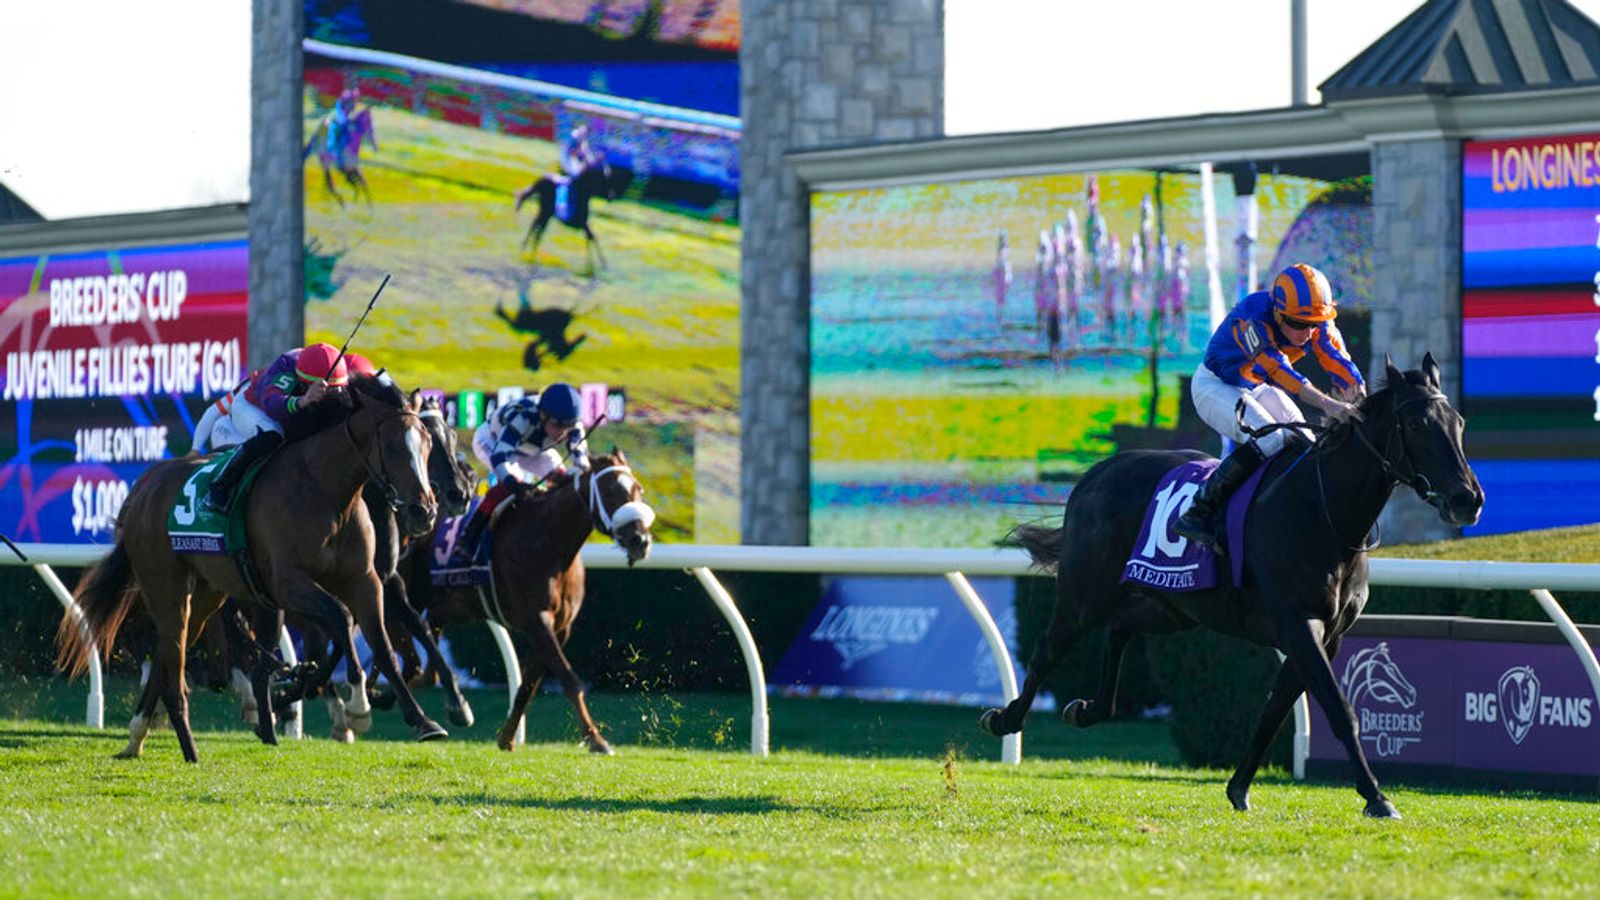 Breeders’ Cup: Meditate blows away rivals in Juvenile Fillies Turf at Keeneland to confirm 1000 Guineas potential